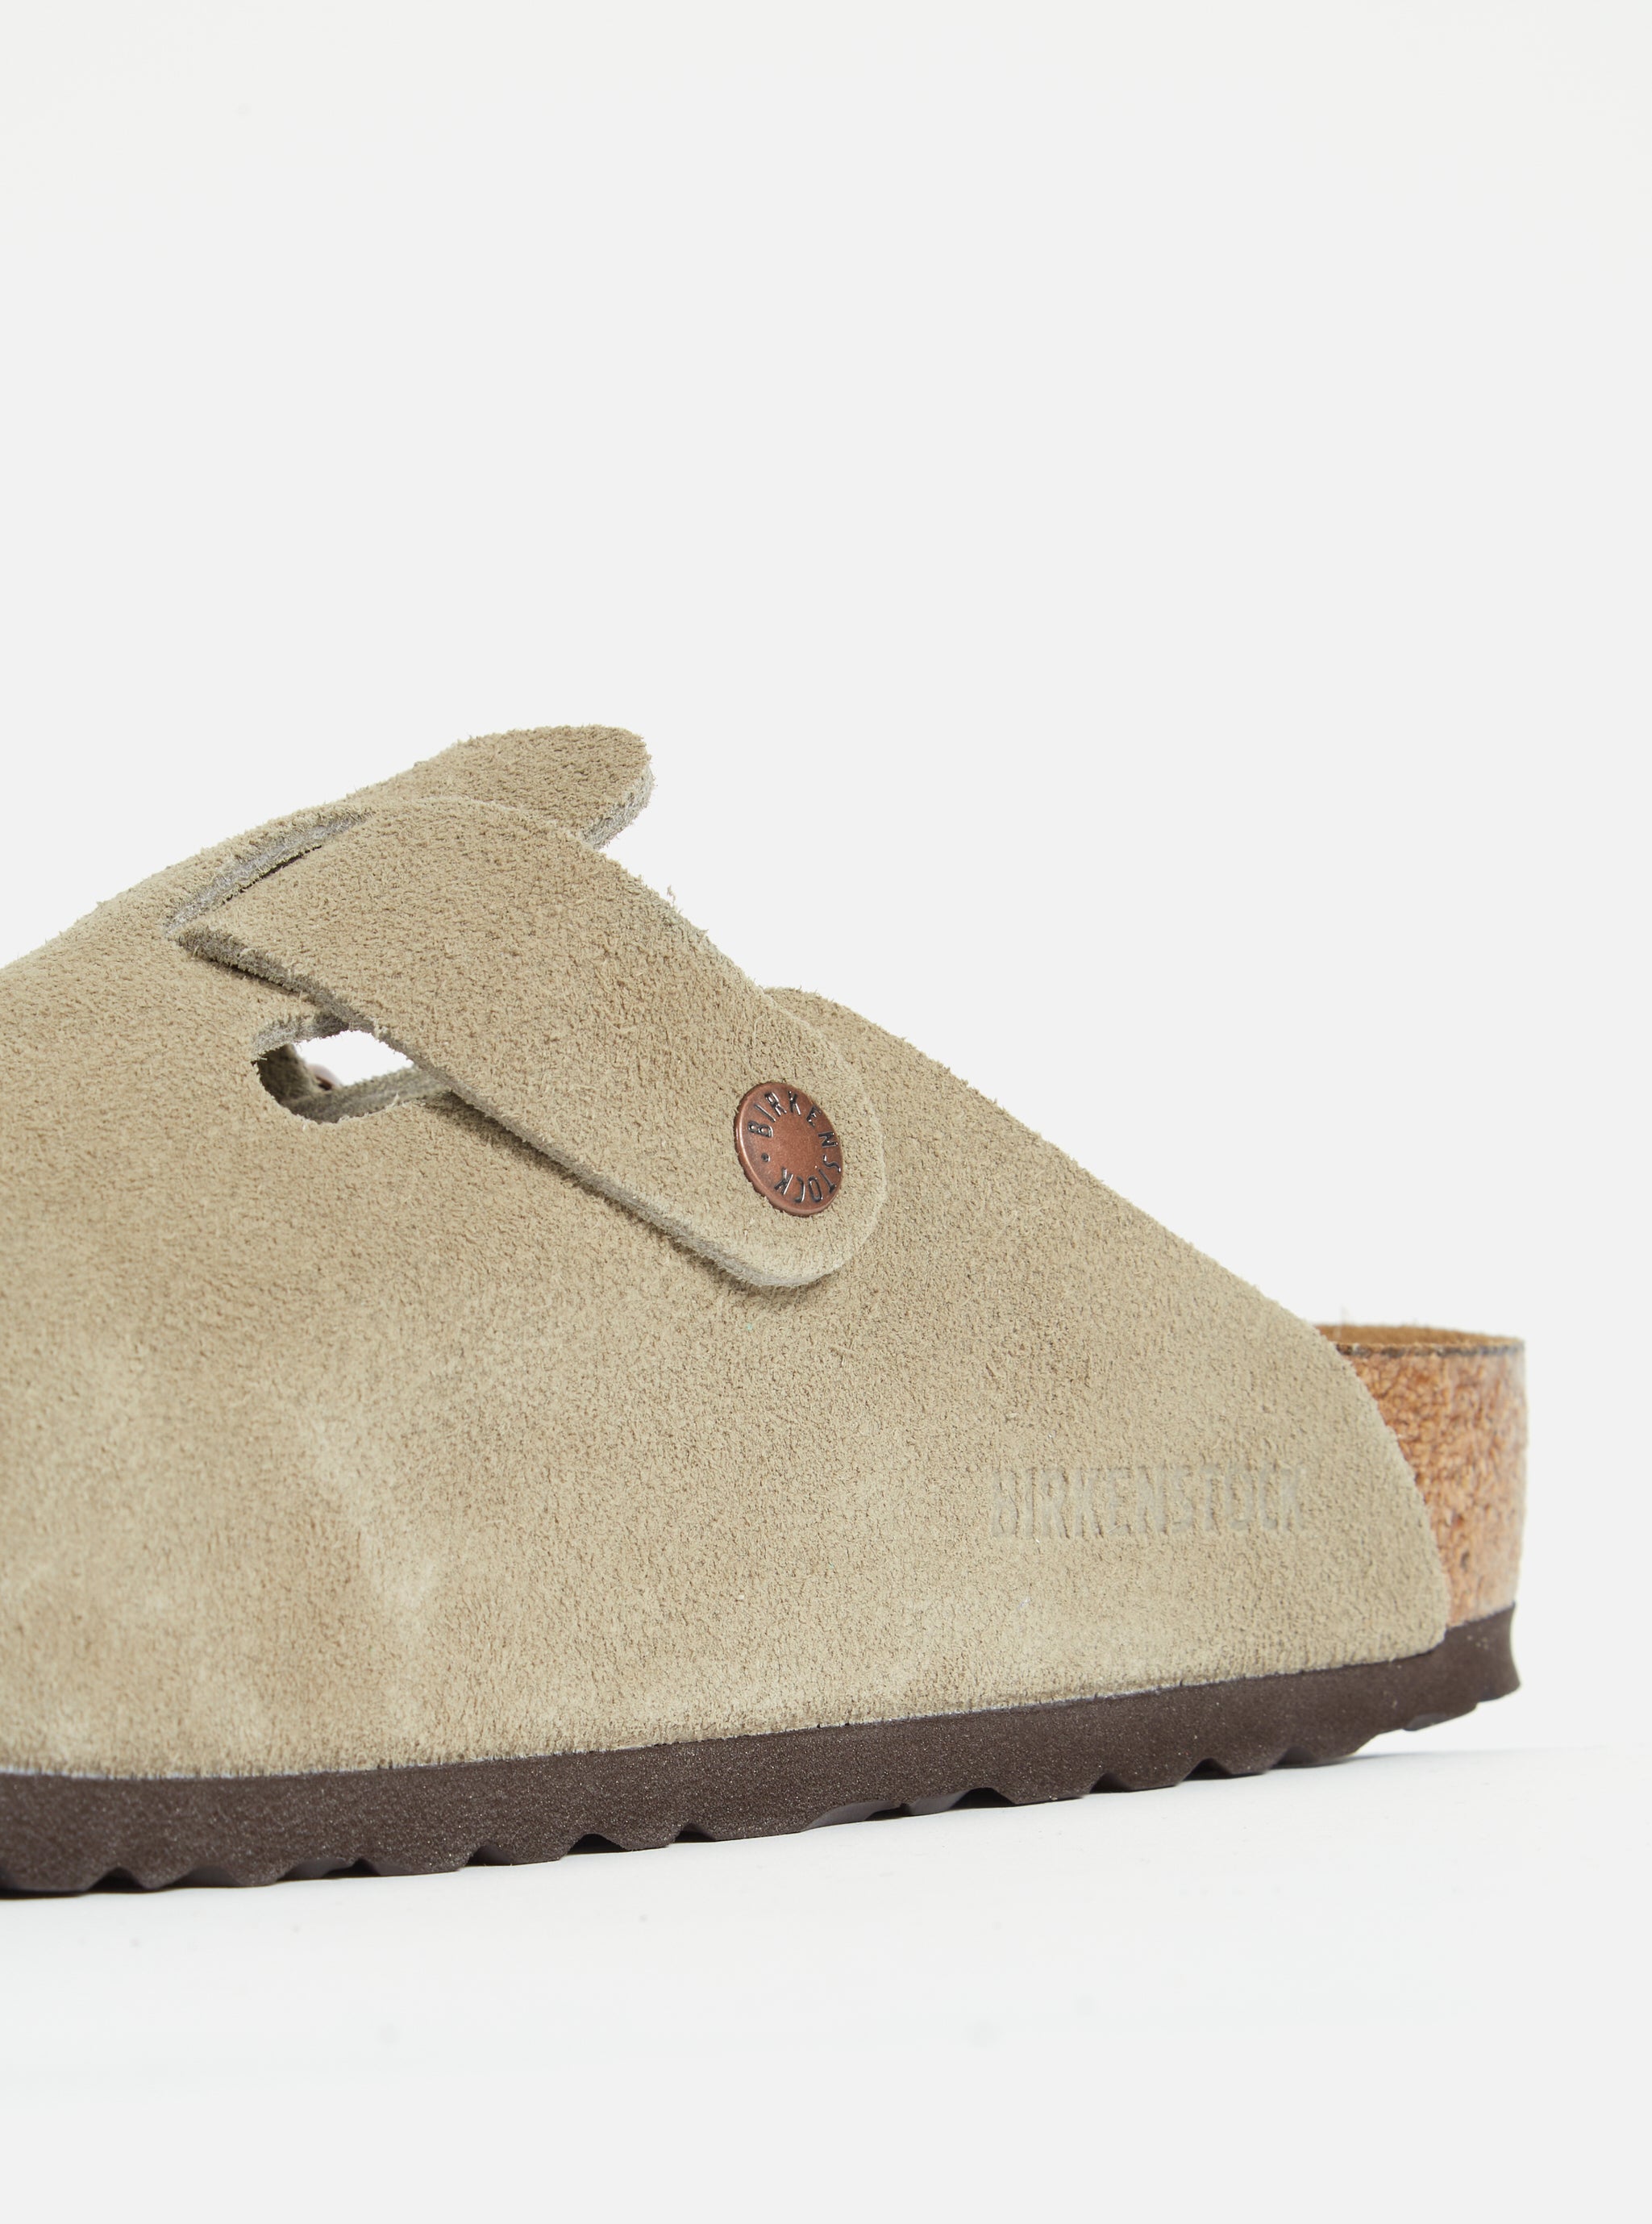 Birkenstock Soft Footbed Boston in Taupe Suede